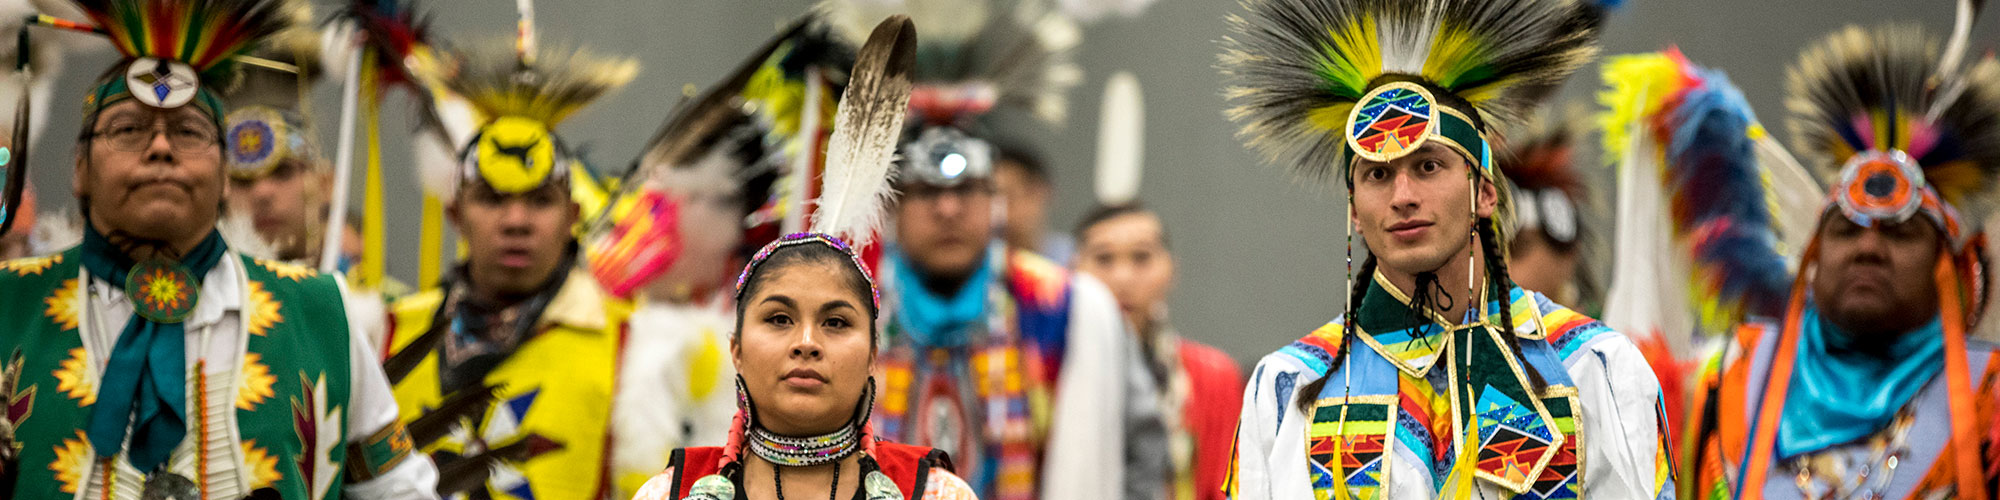 Native American students in traditional dress